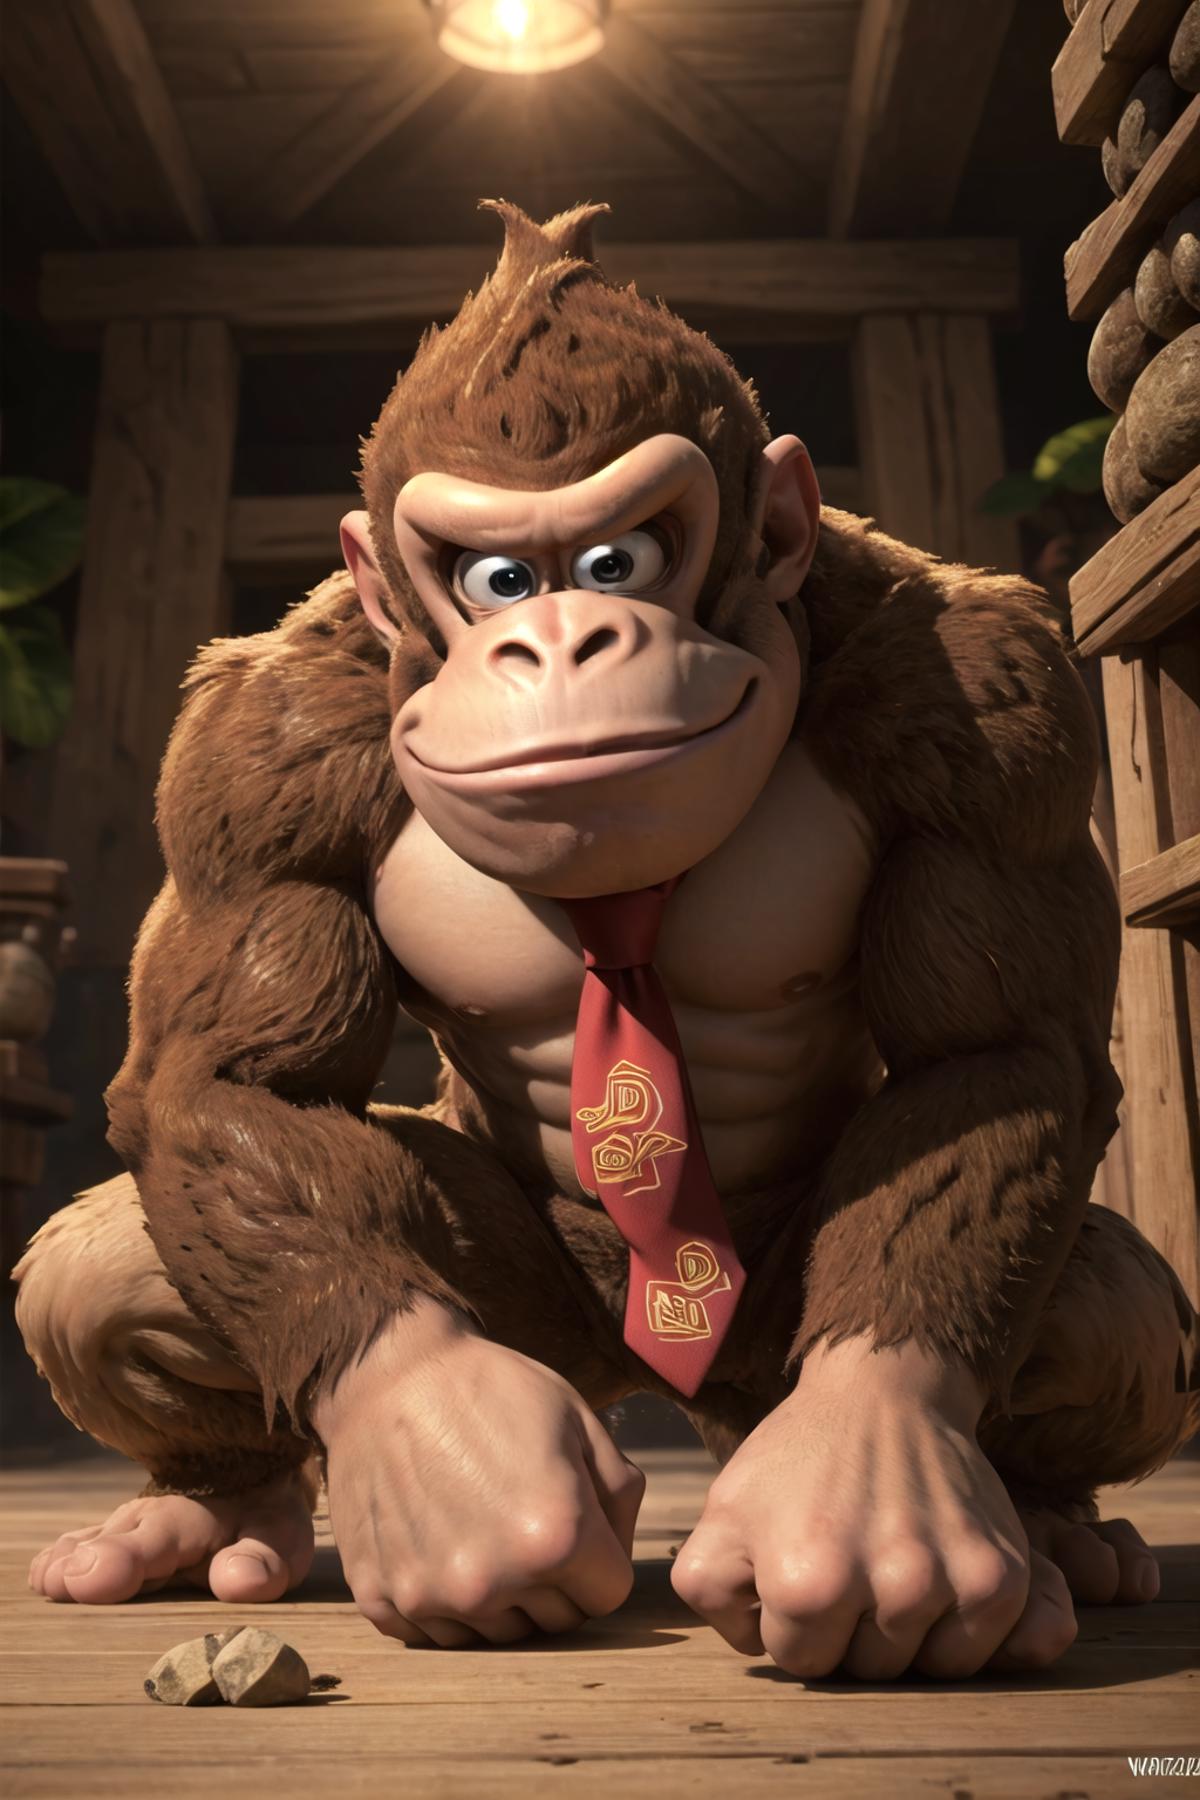 Donkey Kong | 3 character LoRA image by wrench1815